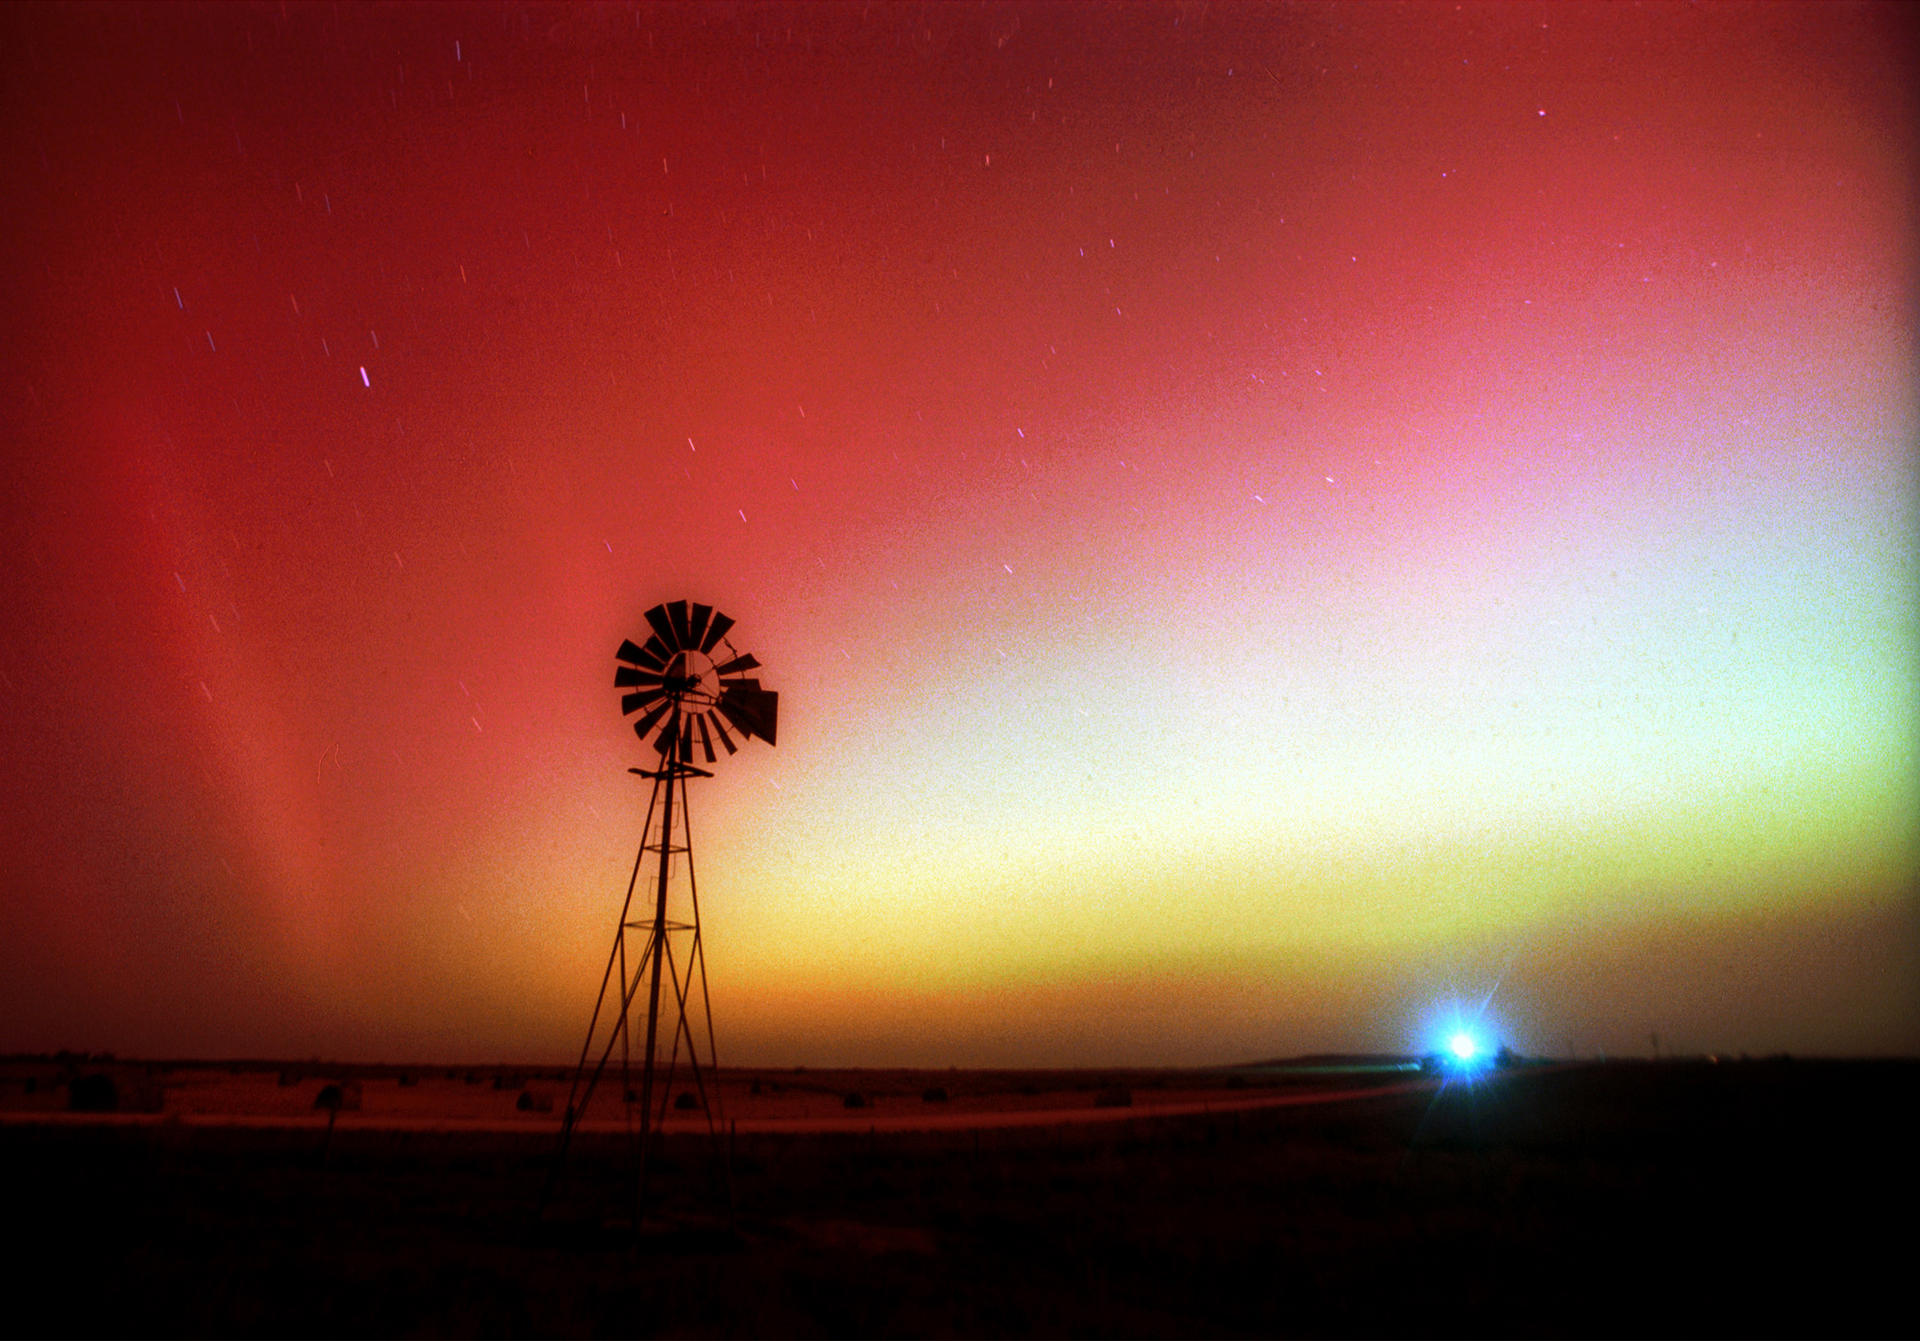 The aurora borealis, in a rare appearance above Kansas, is the most visible sign of the field that shields earth. Photo: AP